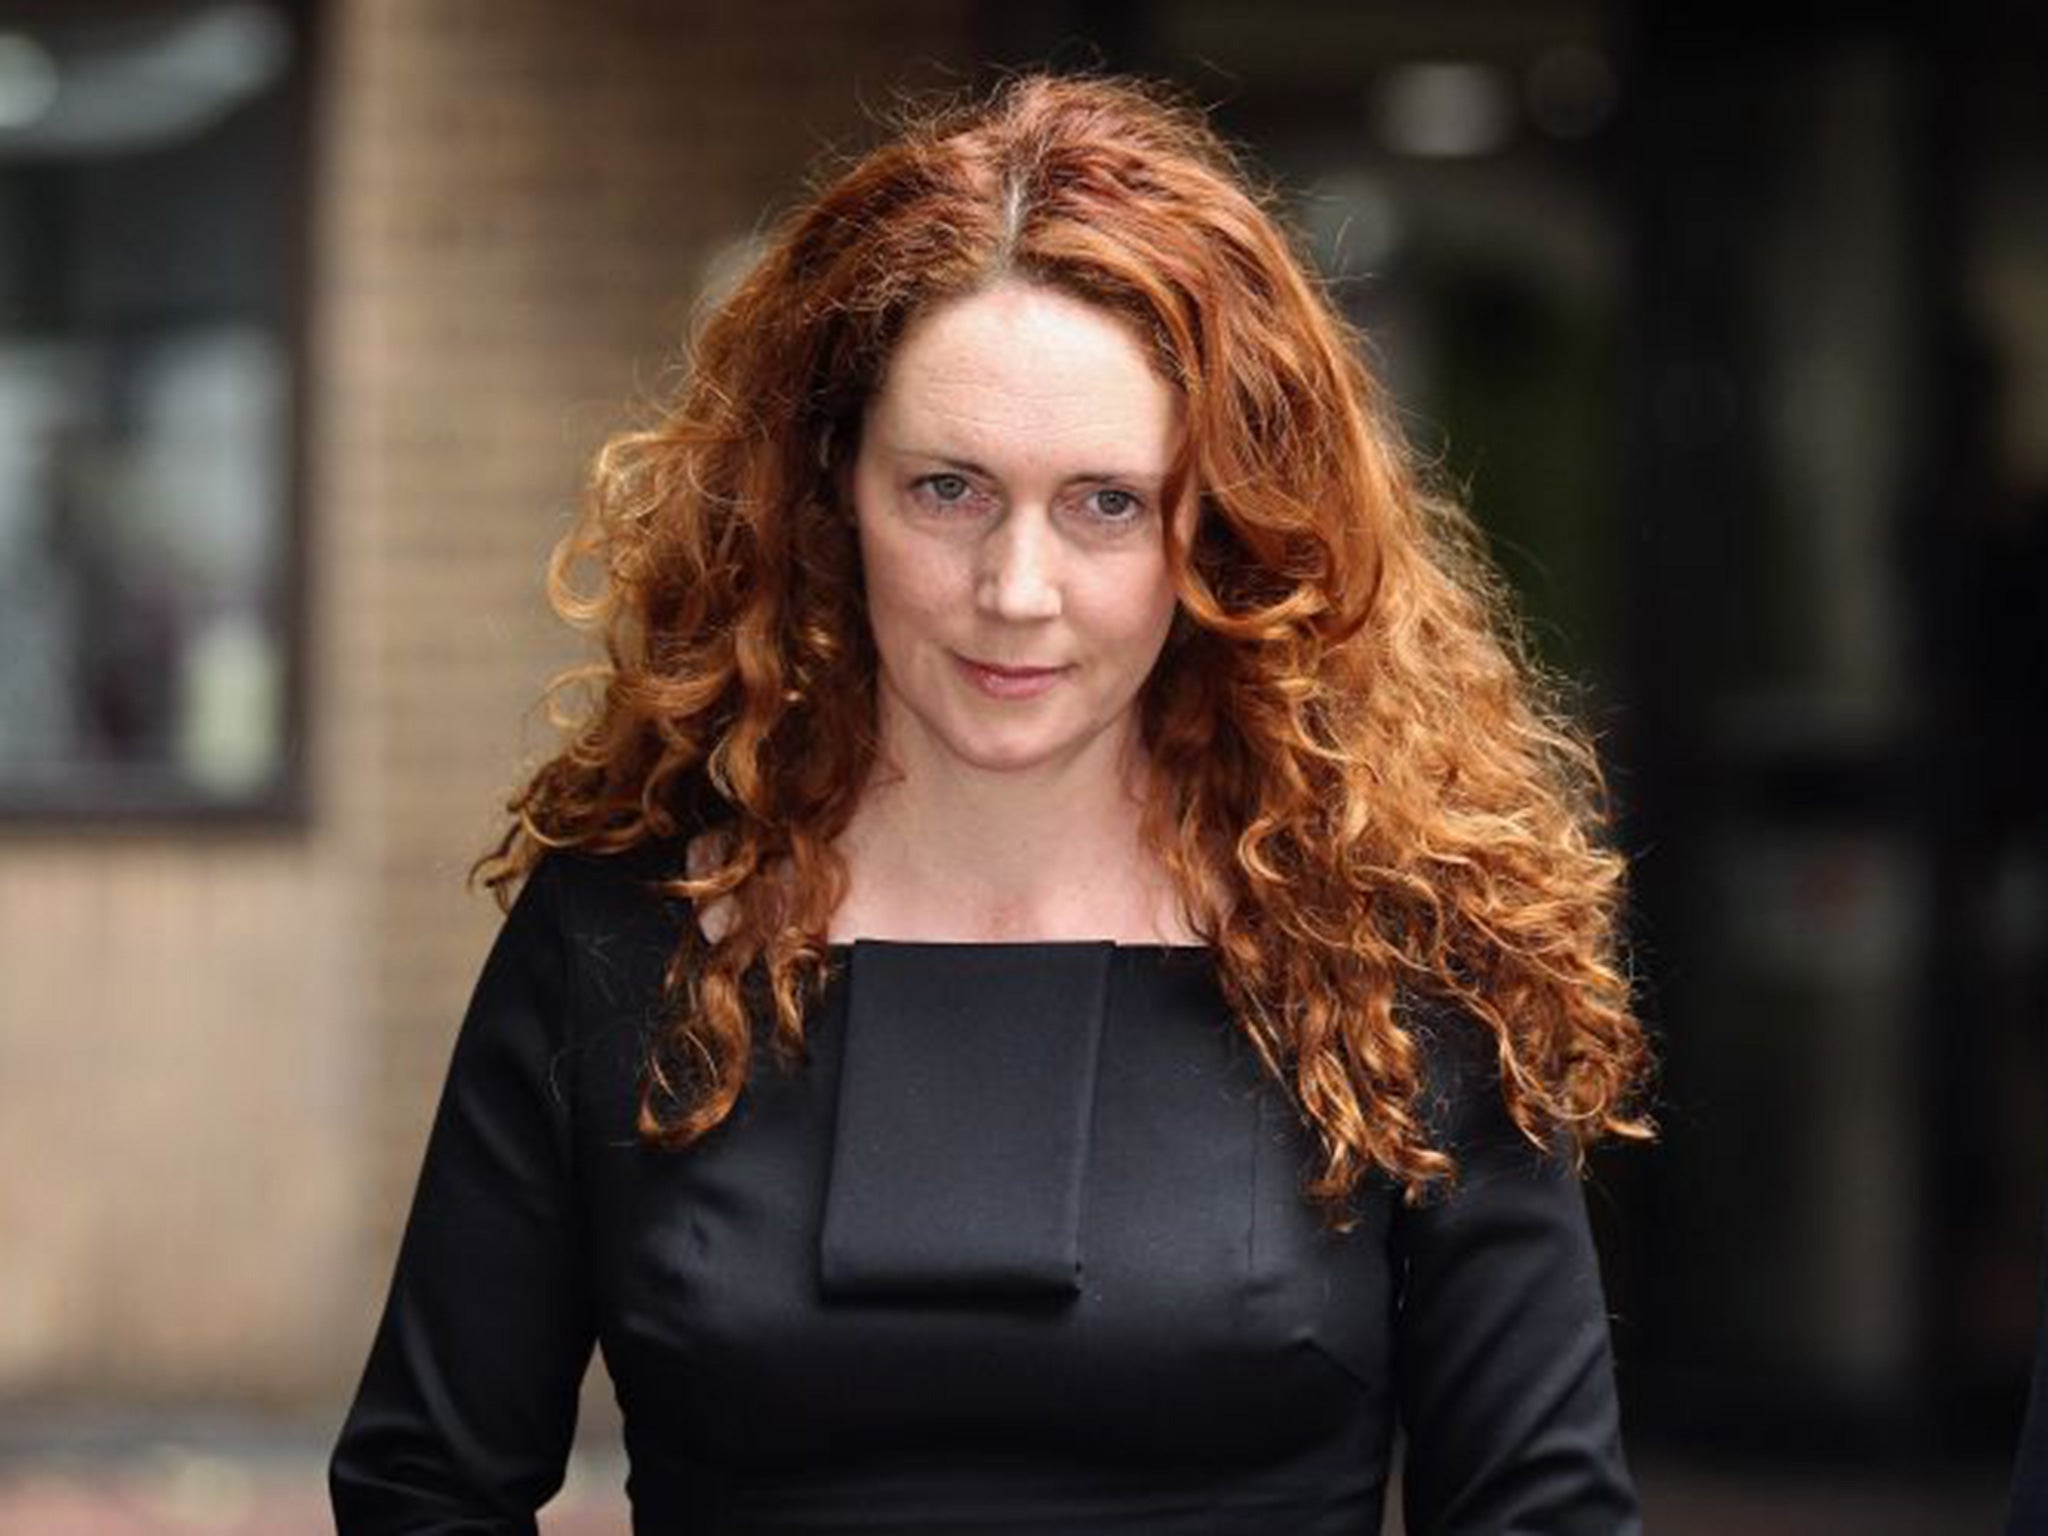 "As time went on, more issues came to light, and again after reporting my concerns of potential illegal activity, which are classed as protected disclosures, I was told just to carry them out without regard to who it involved. This blasé attitude was never so relevant than today with the reinstatement of Rebekah Brooks.”